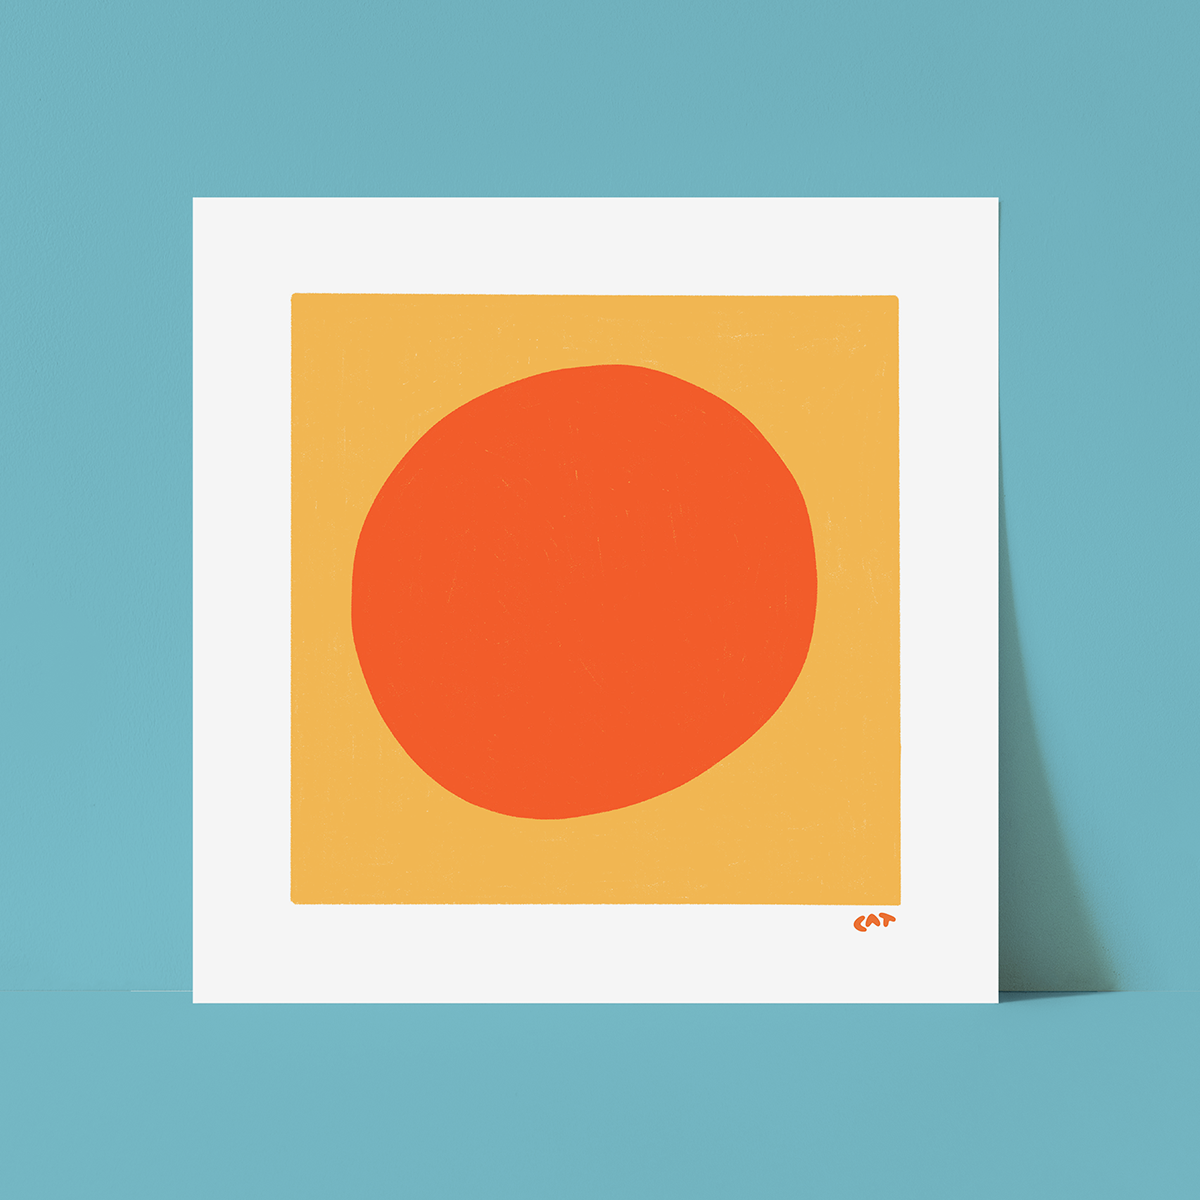 White unframed print of a yellow square with an orange dot in the middle of the square.